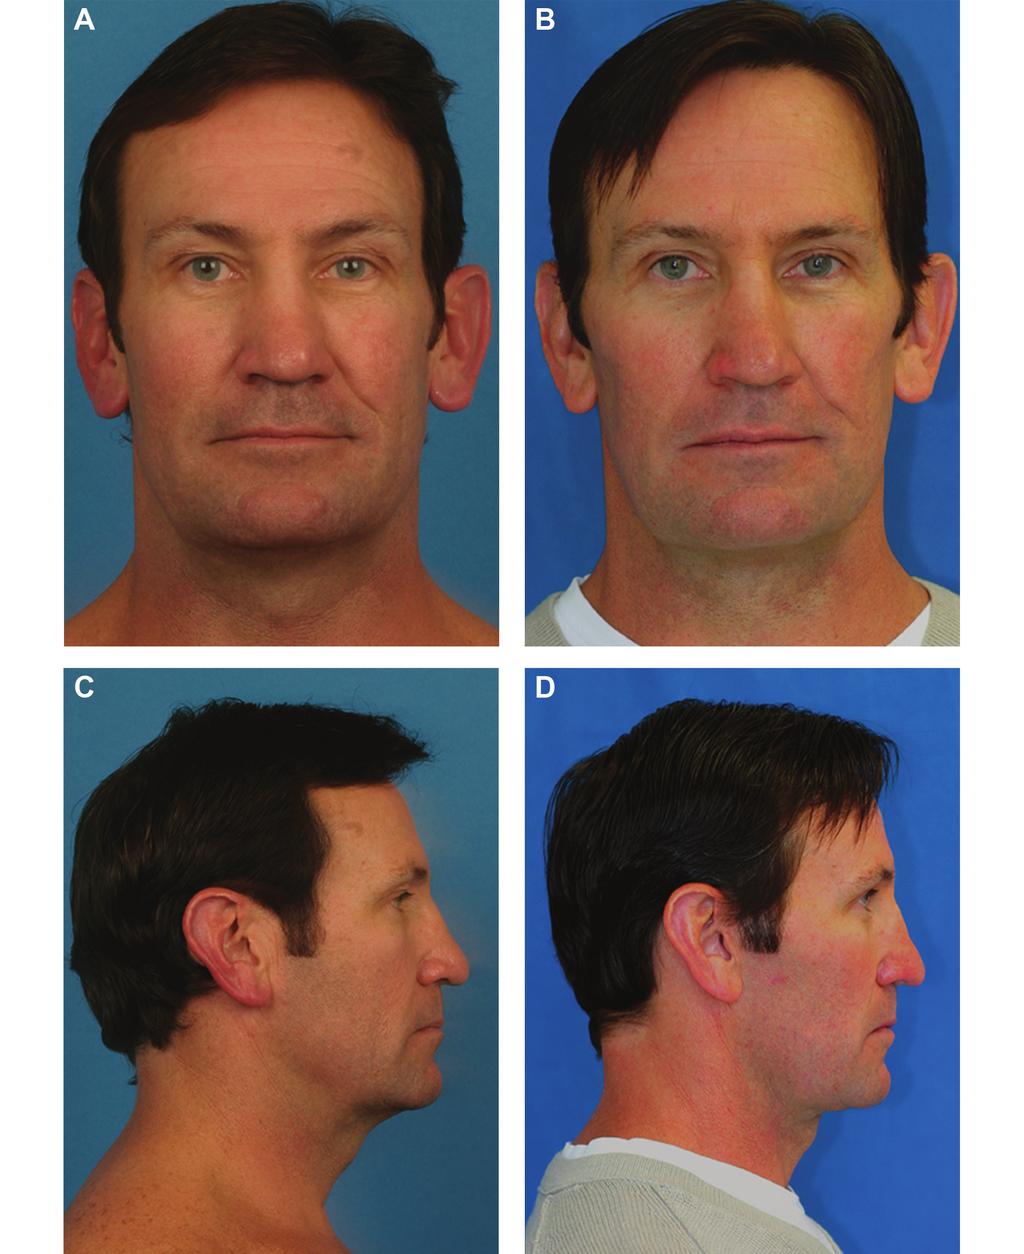 Mueller et al 21 Figure 16. (A, C) This 46-year-old man presented with an aging neck, platysmal banding, and skin laxity.